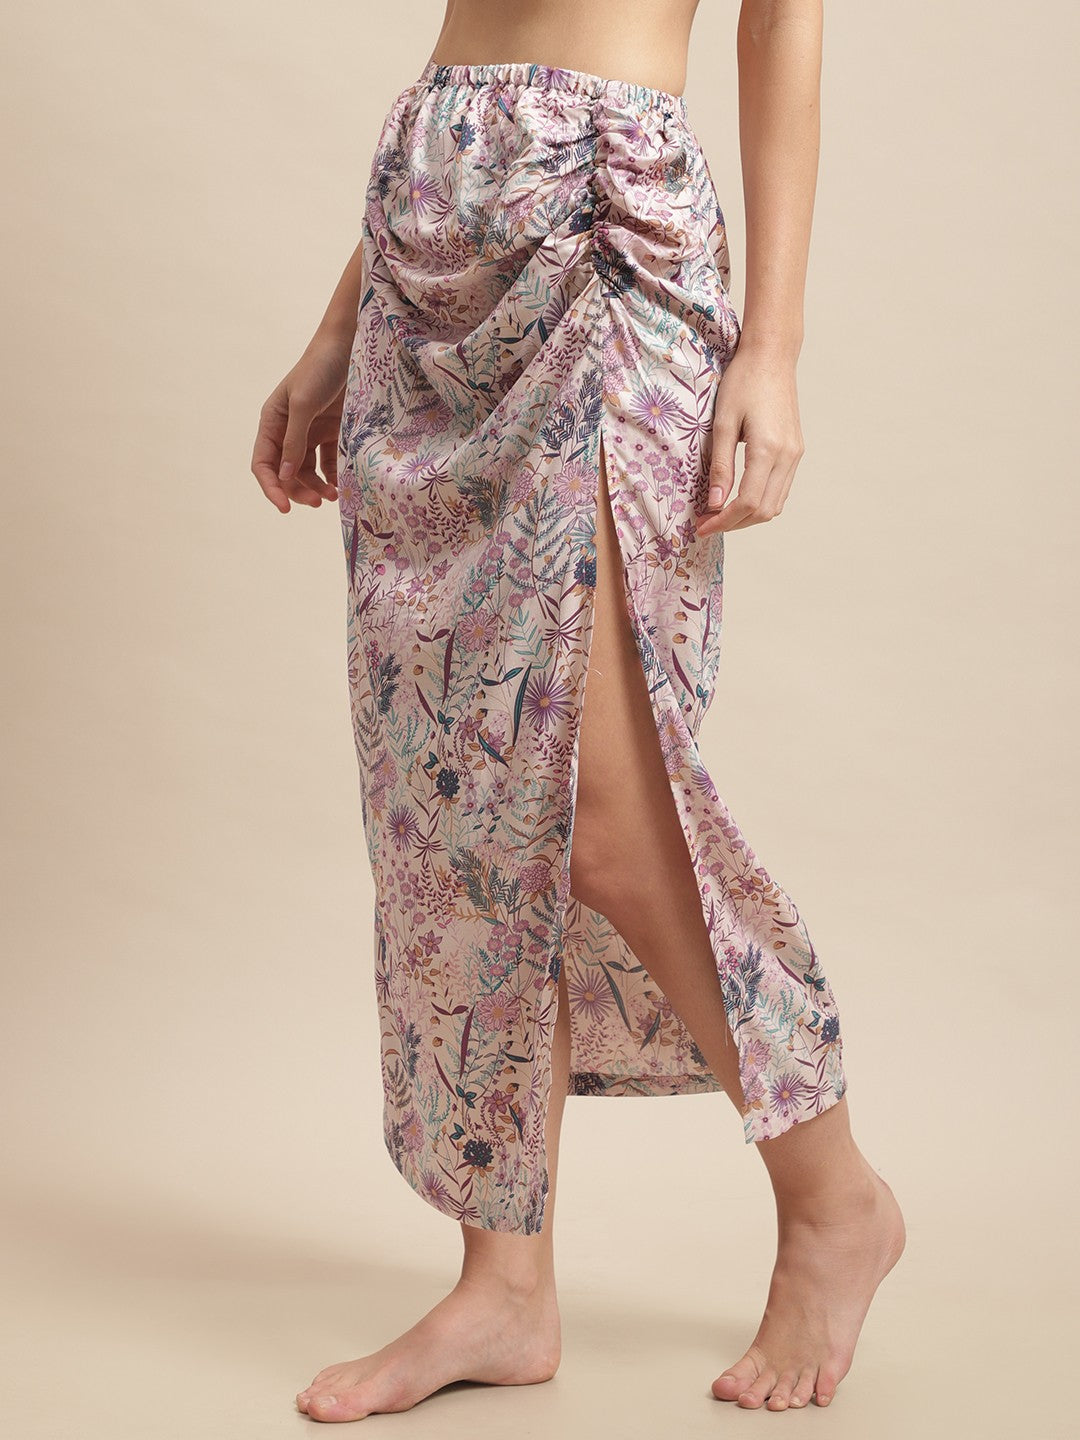 Mauve Color Floral Printed Viscose Rayon Coverup Skirt With Top Beachwear For Woman Claura Designs Pvt. Ltd. Beachwear Beachwear, Beachwear_size, Coverup, Floral, mauve color, Resortwear, Swimwear